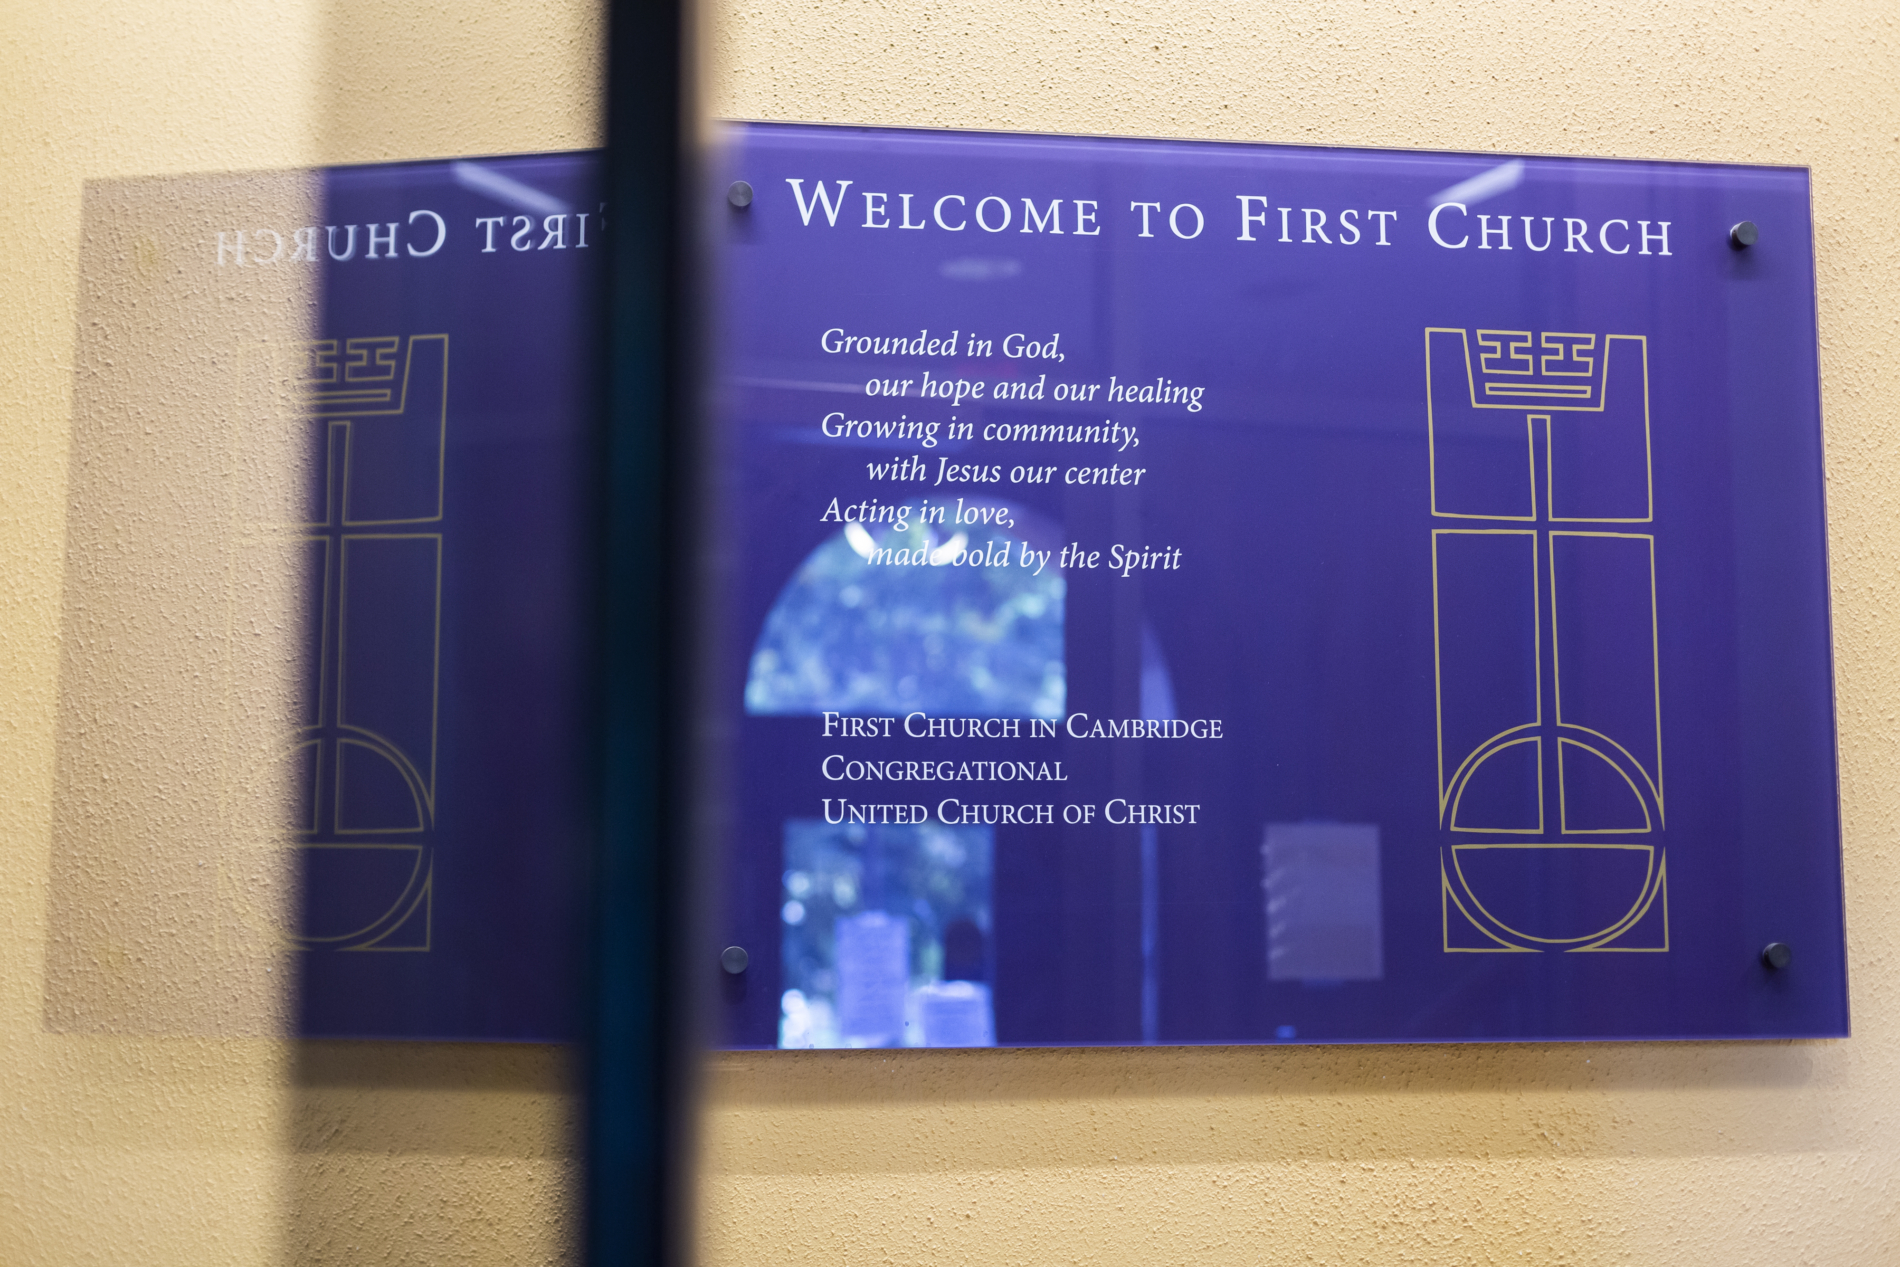 Placard at First Church in Cambridge that reads: Welcome to First Church. Grounded in God, our hope and our healing. Growing in community, with Jesus at our center. Acting in love, made bold by the Spirit. First Church in Cambridge, Congregational, United Church of Christ.